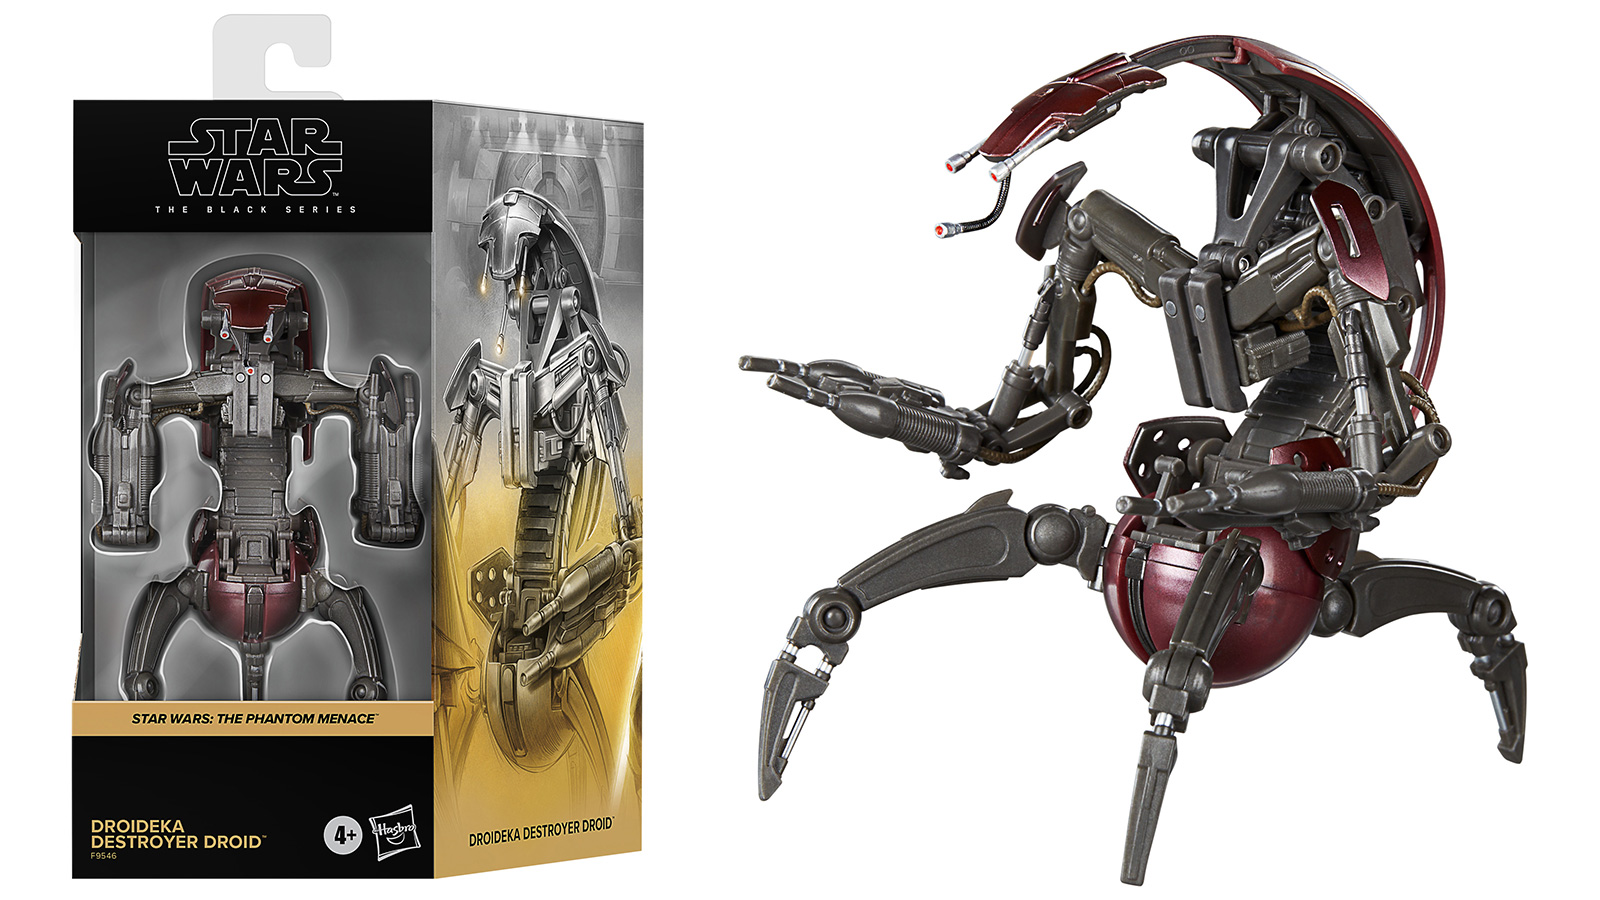 In Stock At Entertainment Earth And 10% Off - Exclusive TBS 6-Inch Deluxe Droideka